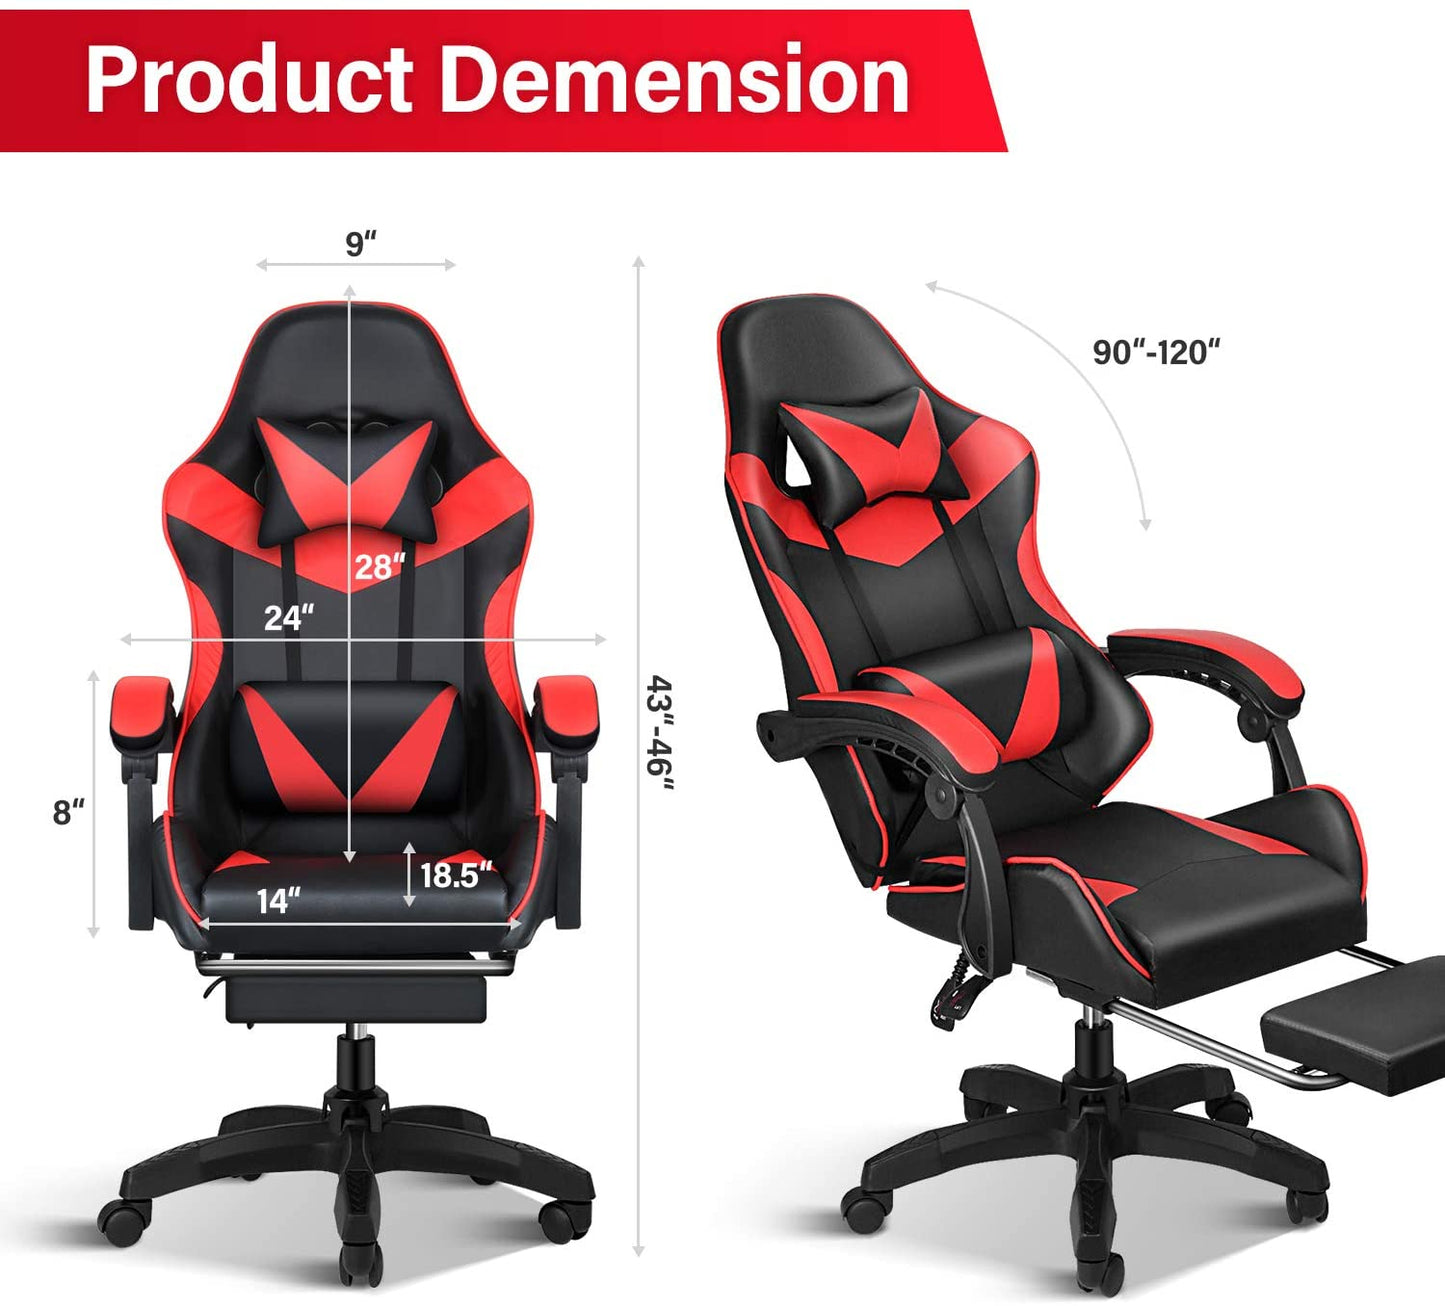 Premium Ergonomic Red and Black Racing Office Chair with Adjustable Backrest, Height, Swivel, Footrest, and Lumbar Support - The Ultimate Gaming Throne